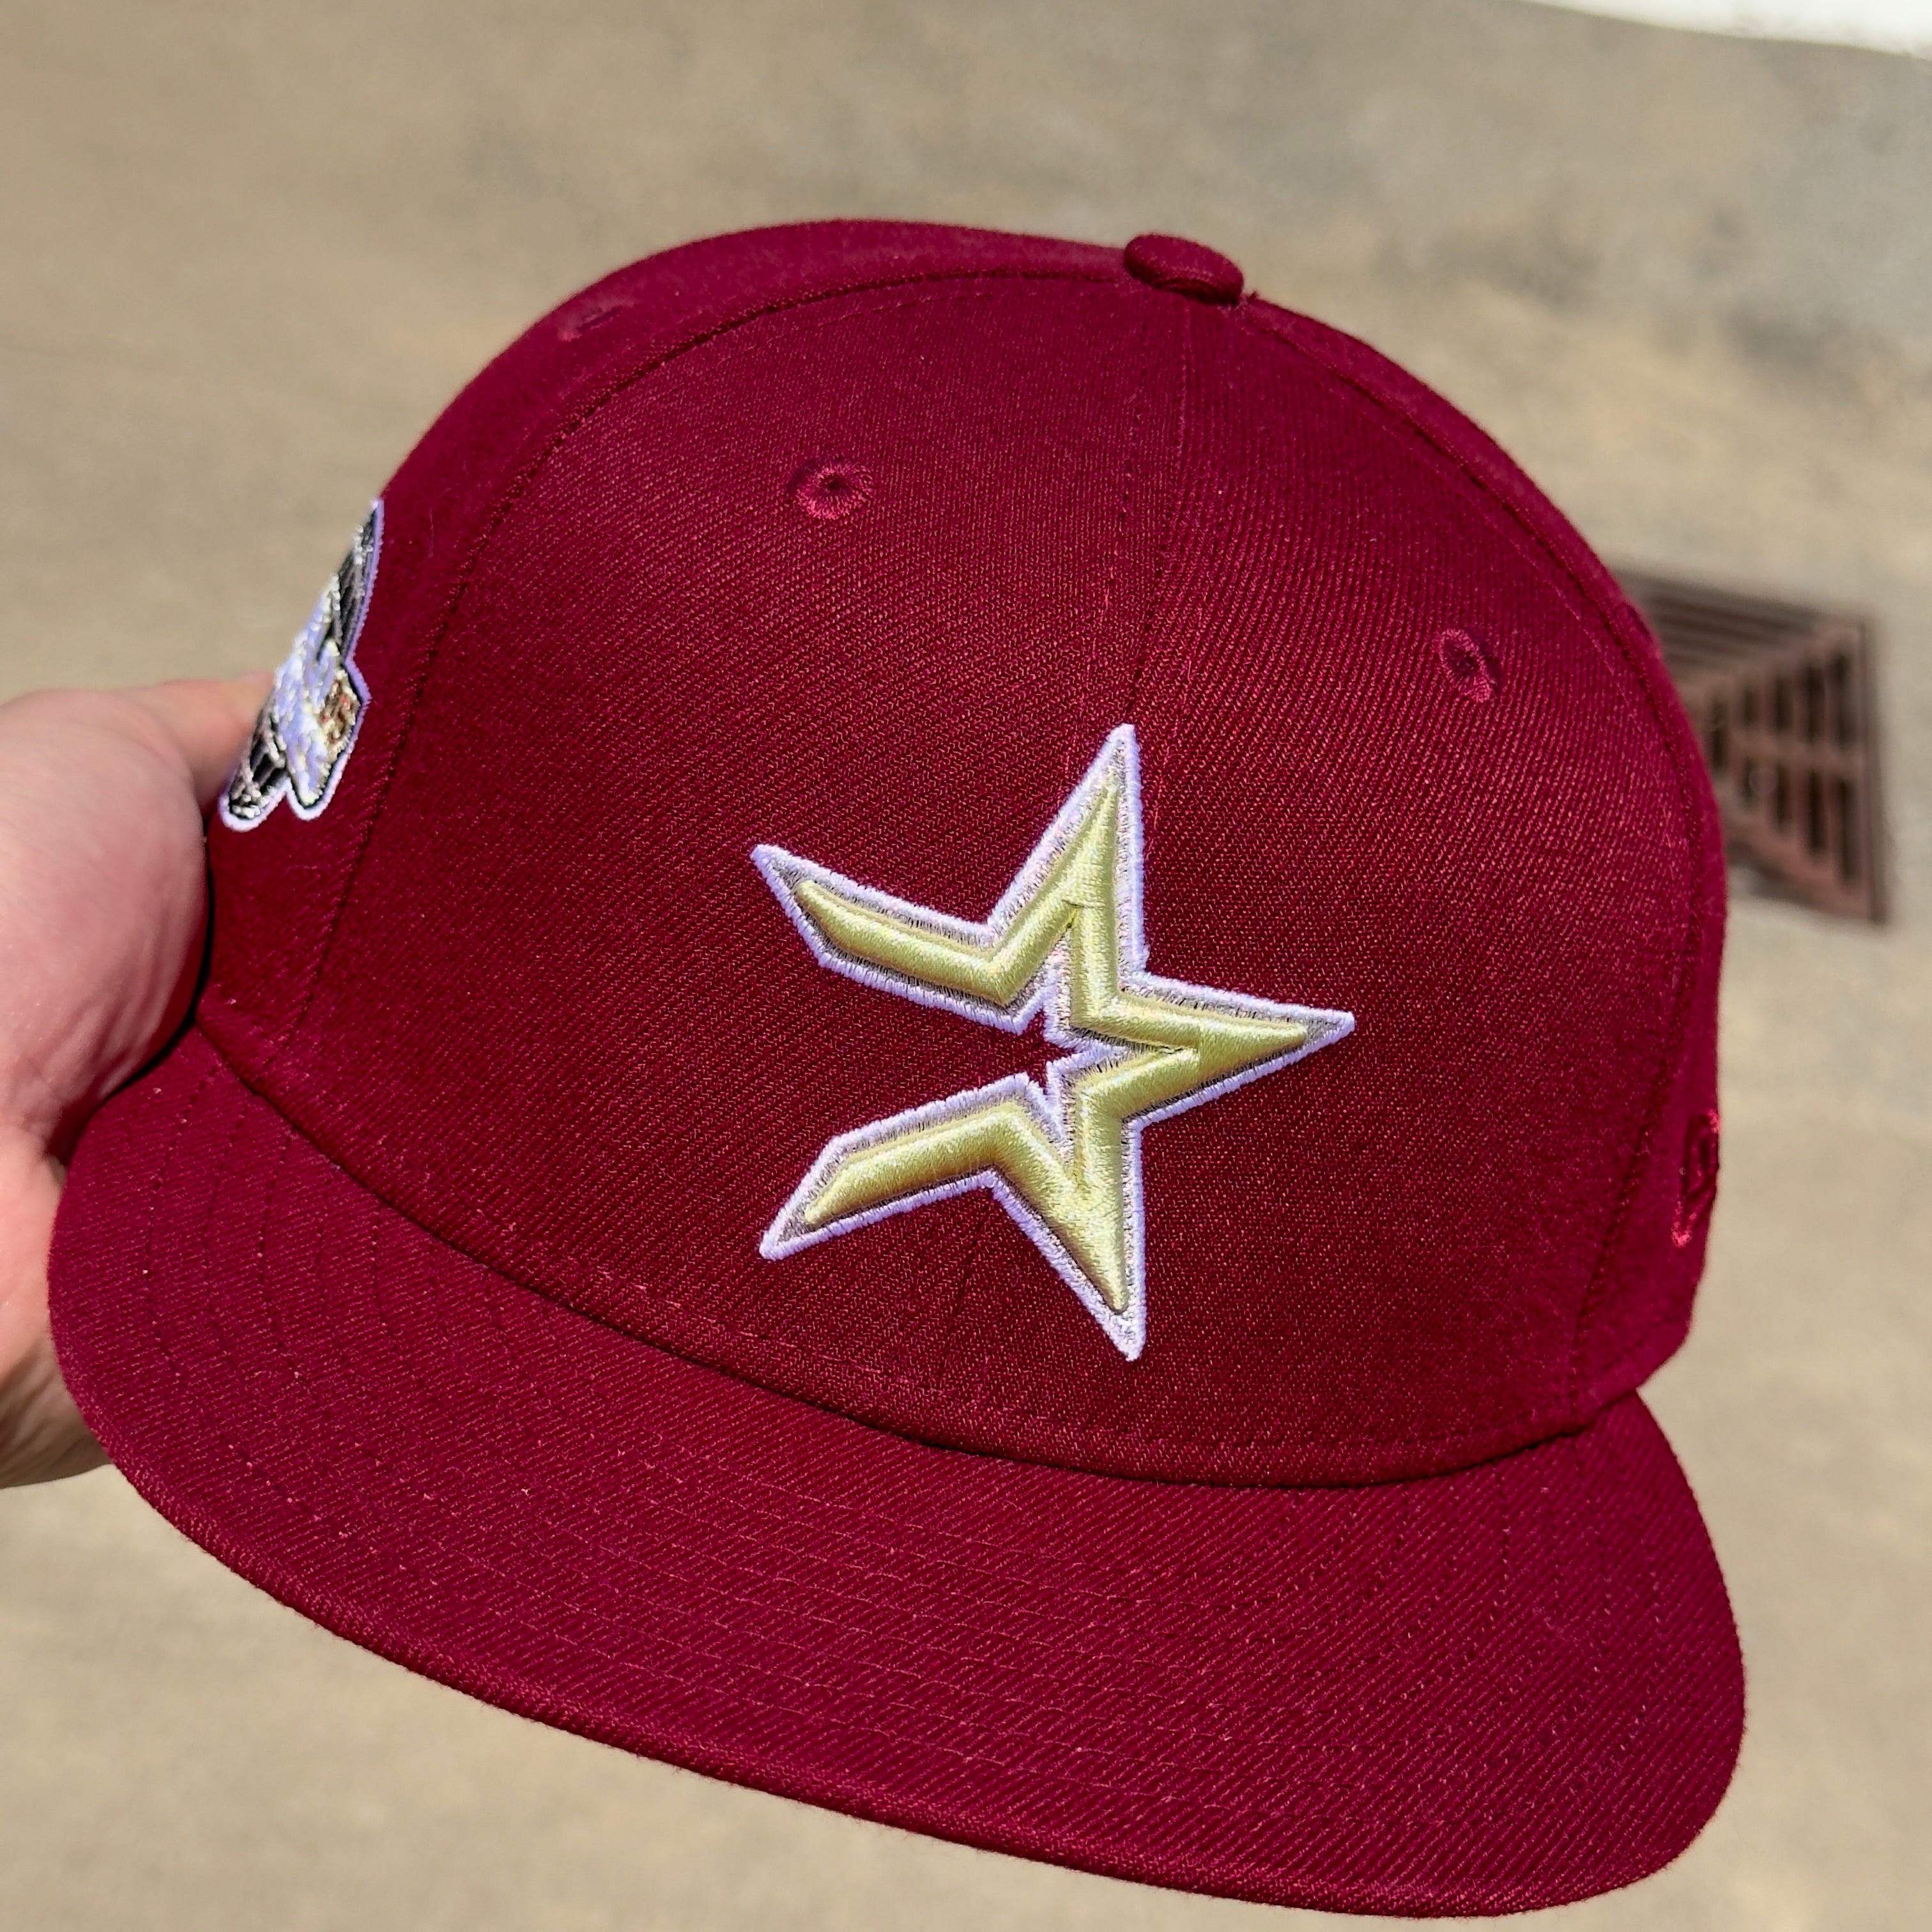 1/2 USED Burgundy Houston Astros 2005 World Series 59fifty New Era Fitted Hat Cap